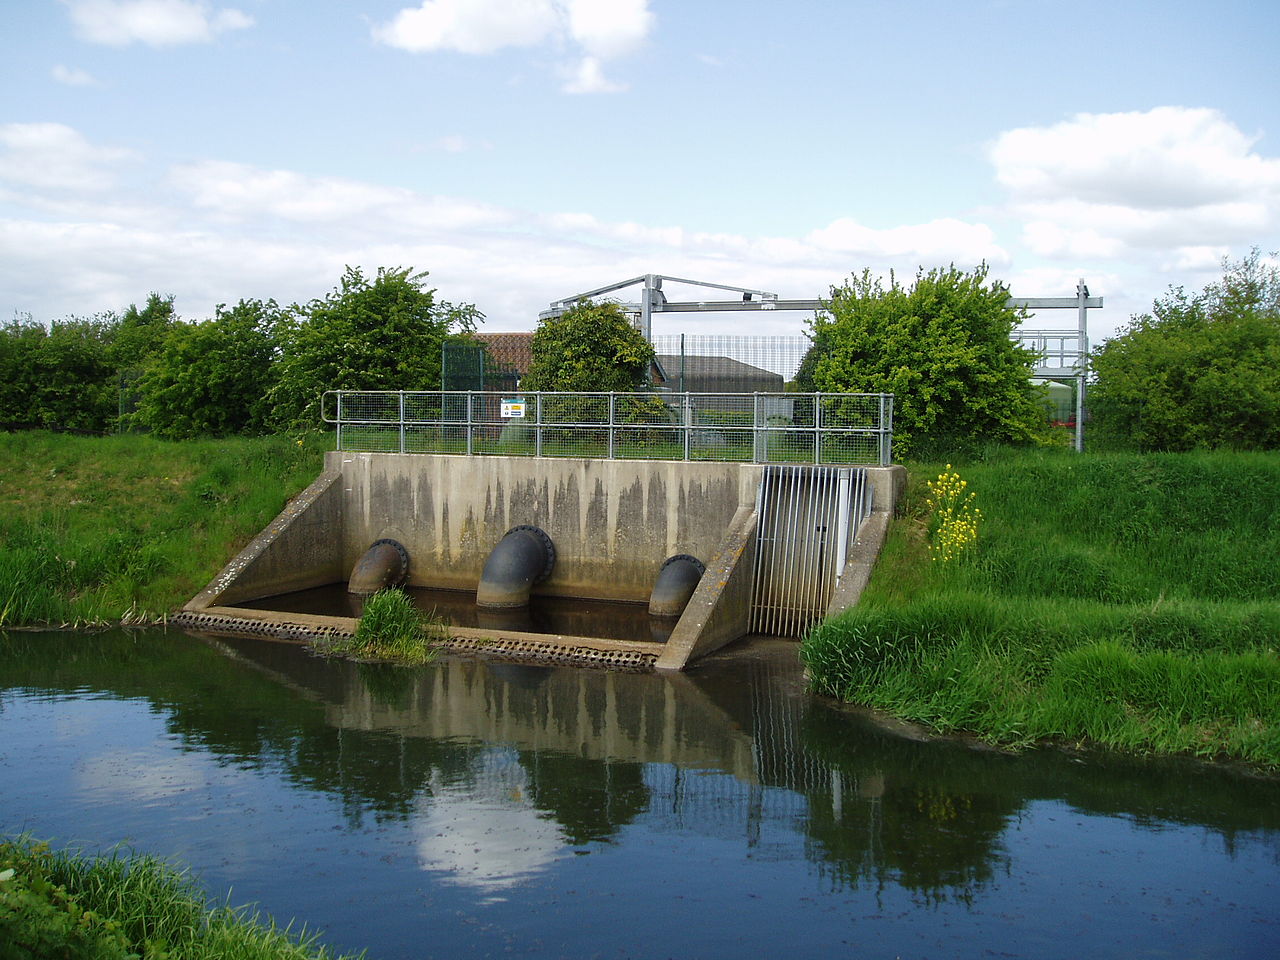 The outlet from Candy Farm North pumping station into the River Torne, South Yorkshire